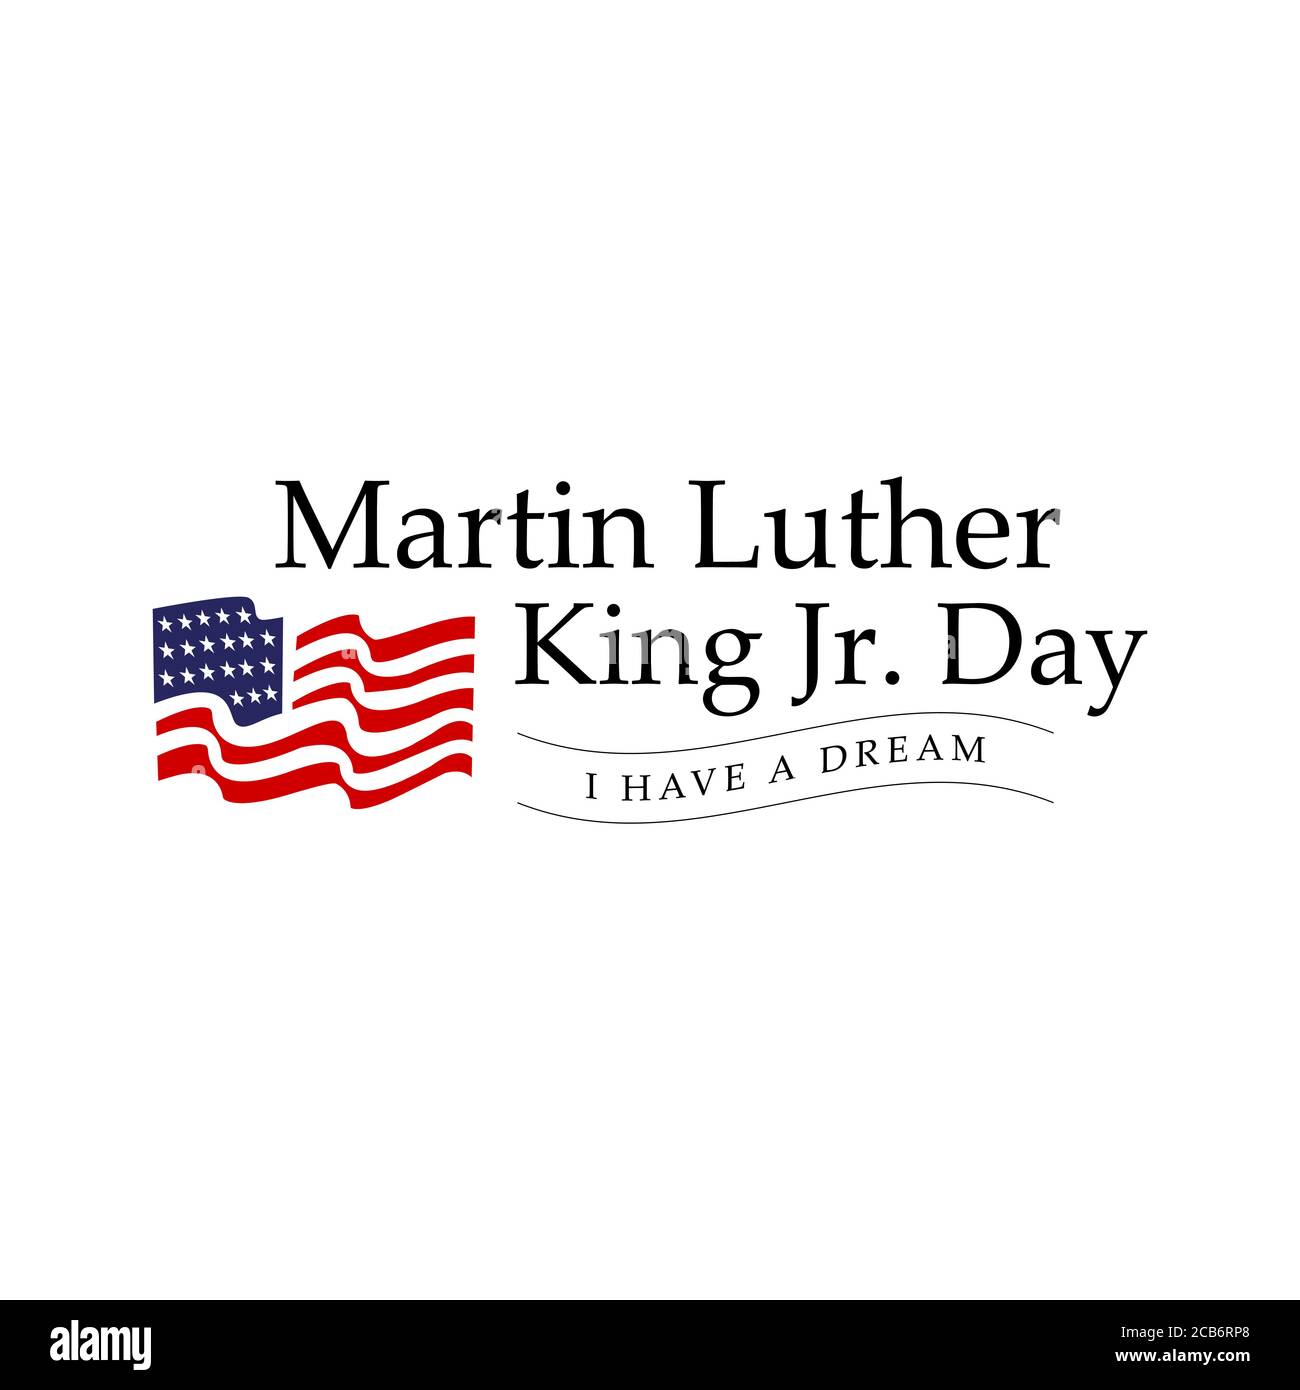 Martin luther king jr. day. With text i have a dream. American flag. MLK Banner of memorial day. Editable Vector illustration. eps 10 Stock Vector